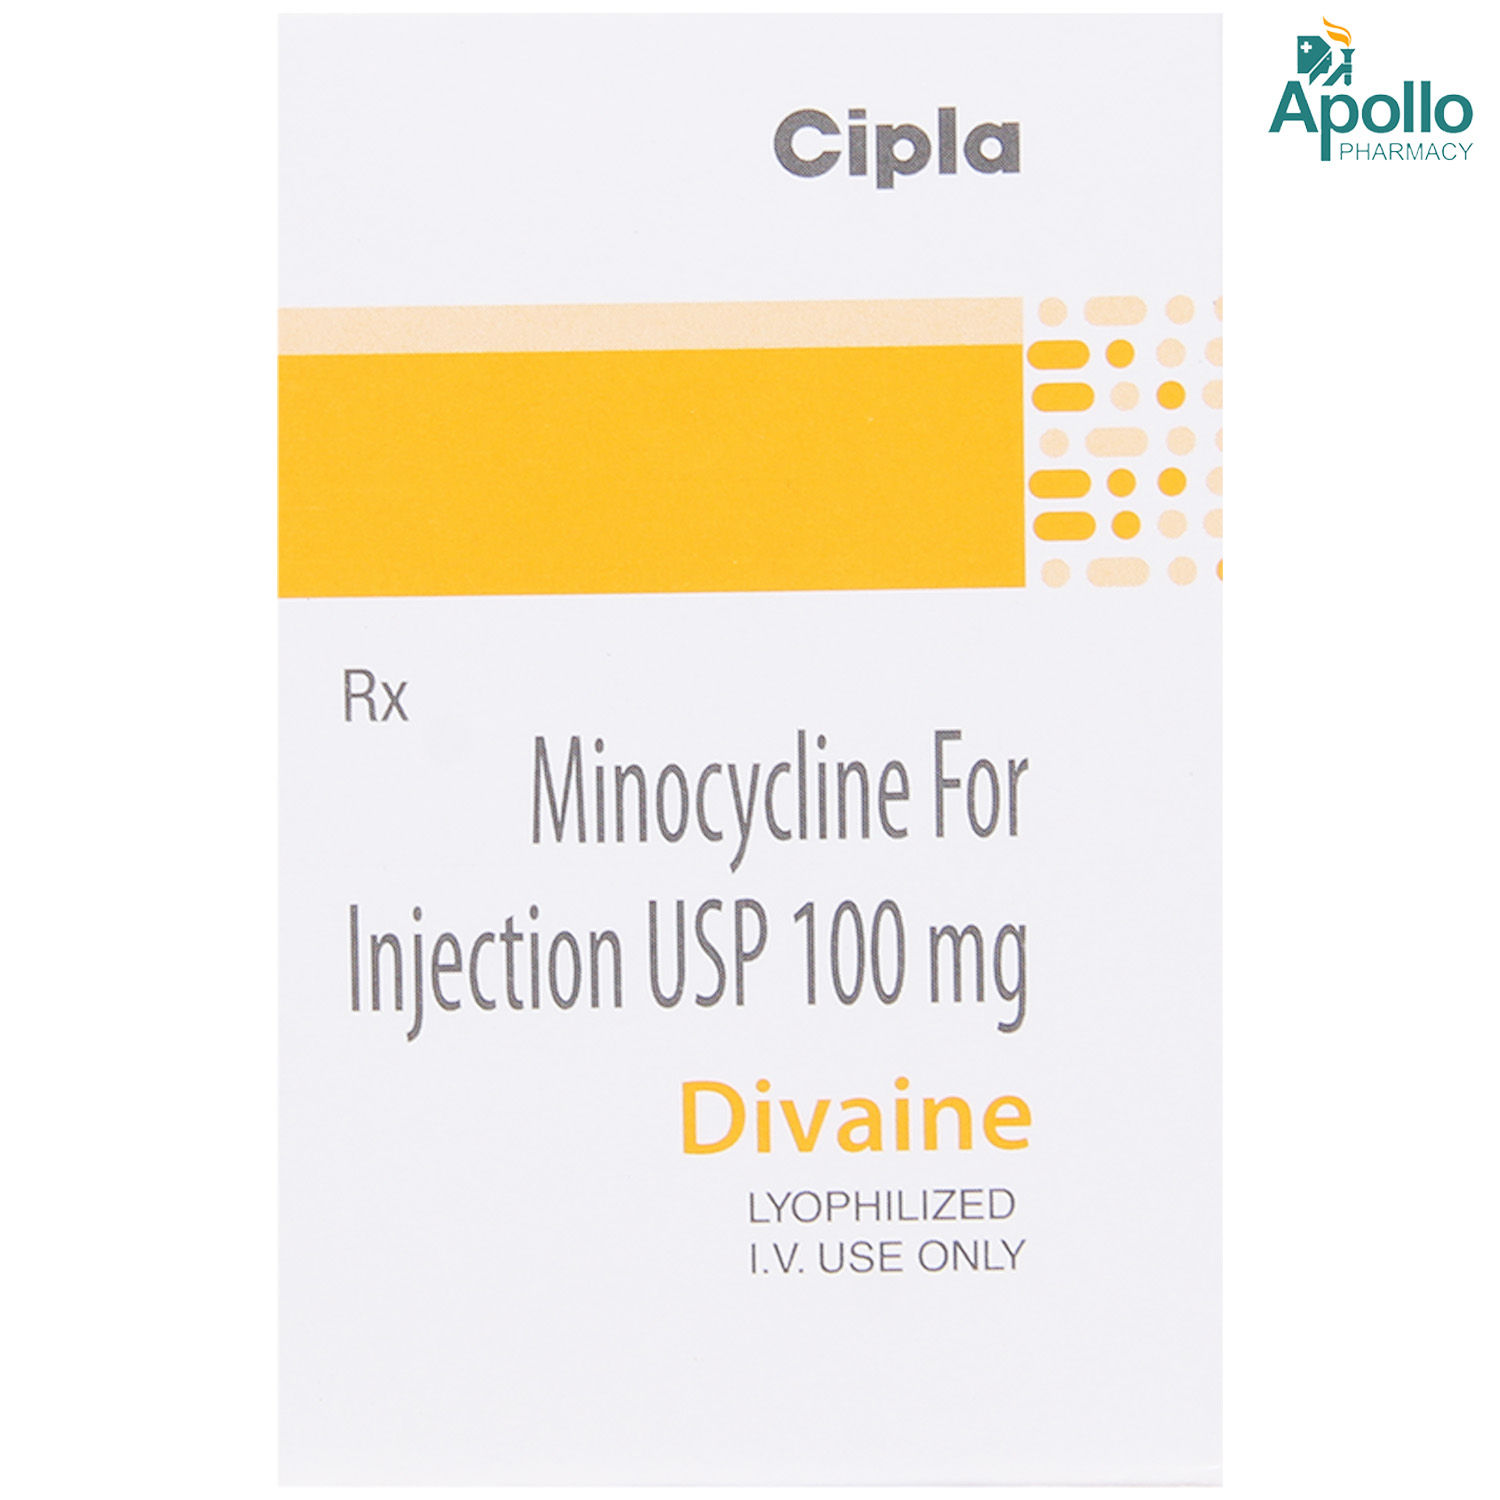 DIVAINE 100MG INJECTION, Pack of 1 INJECTION